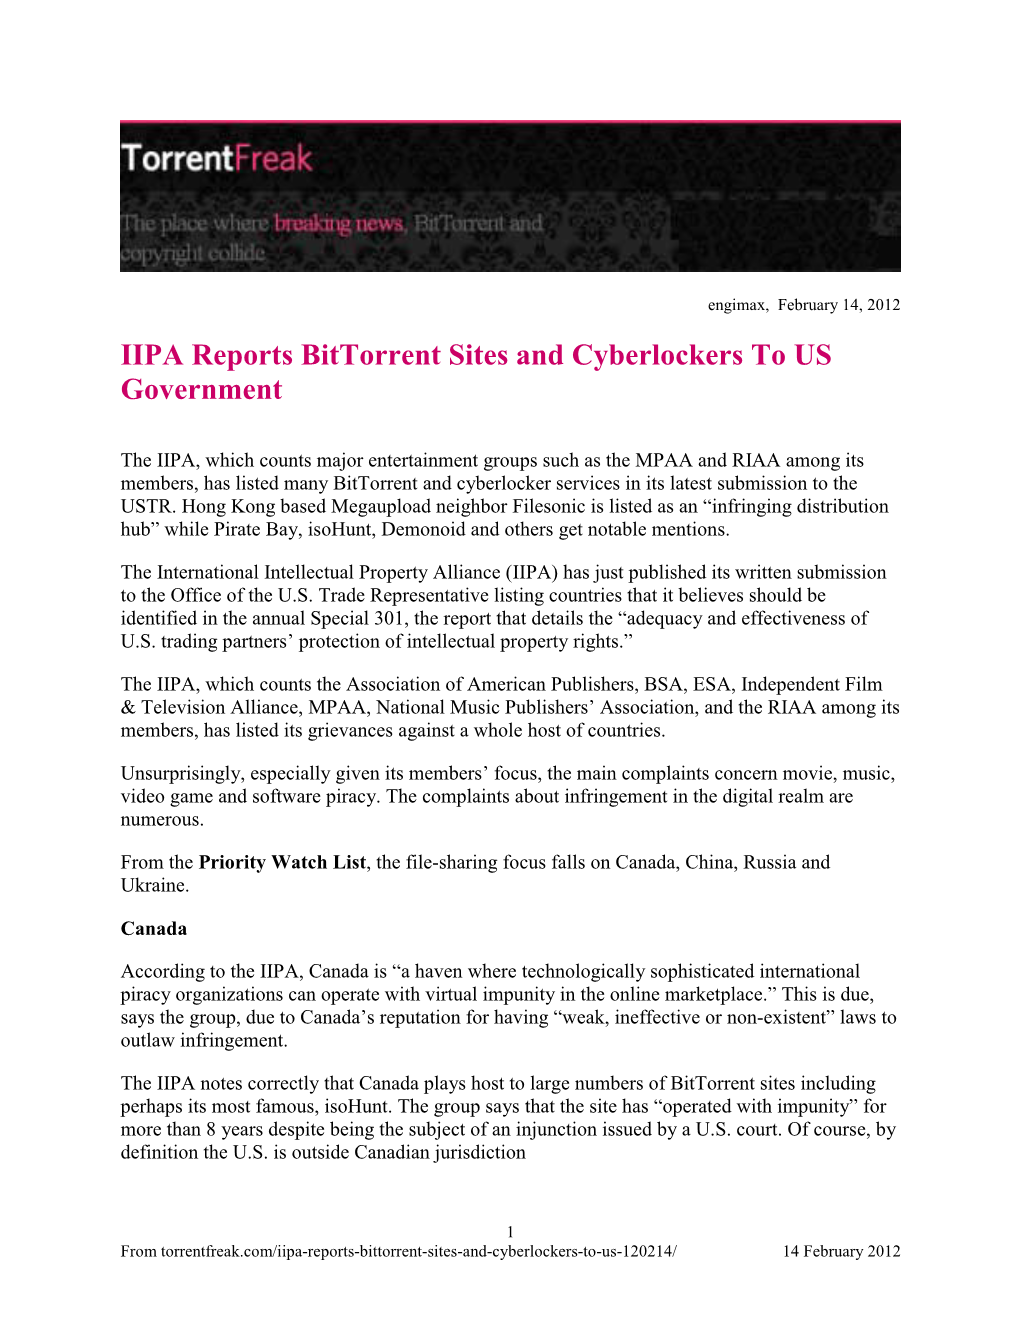 IIPA Reports Bittorrent Sites and Cyberlockers to US Government